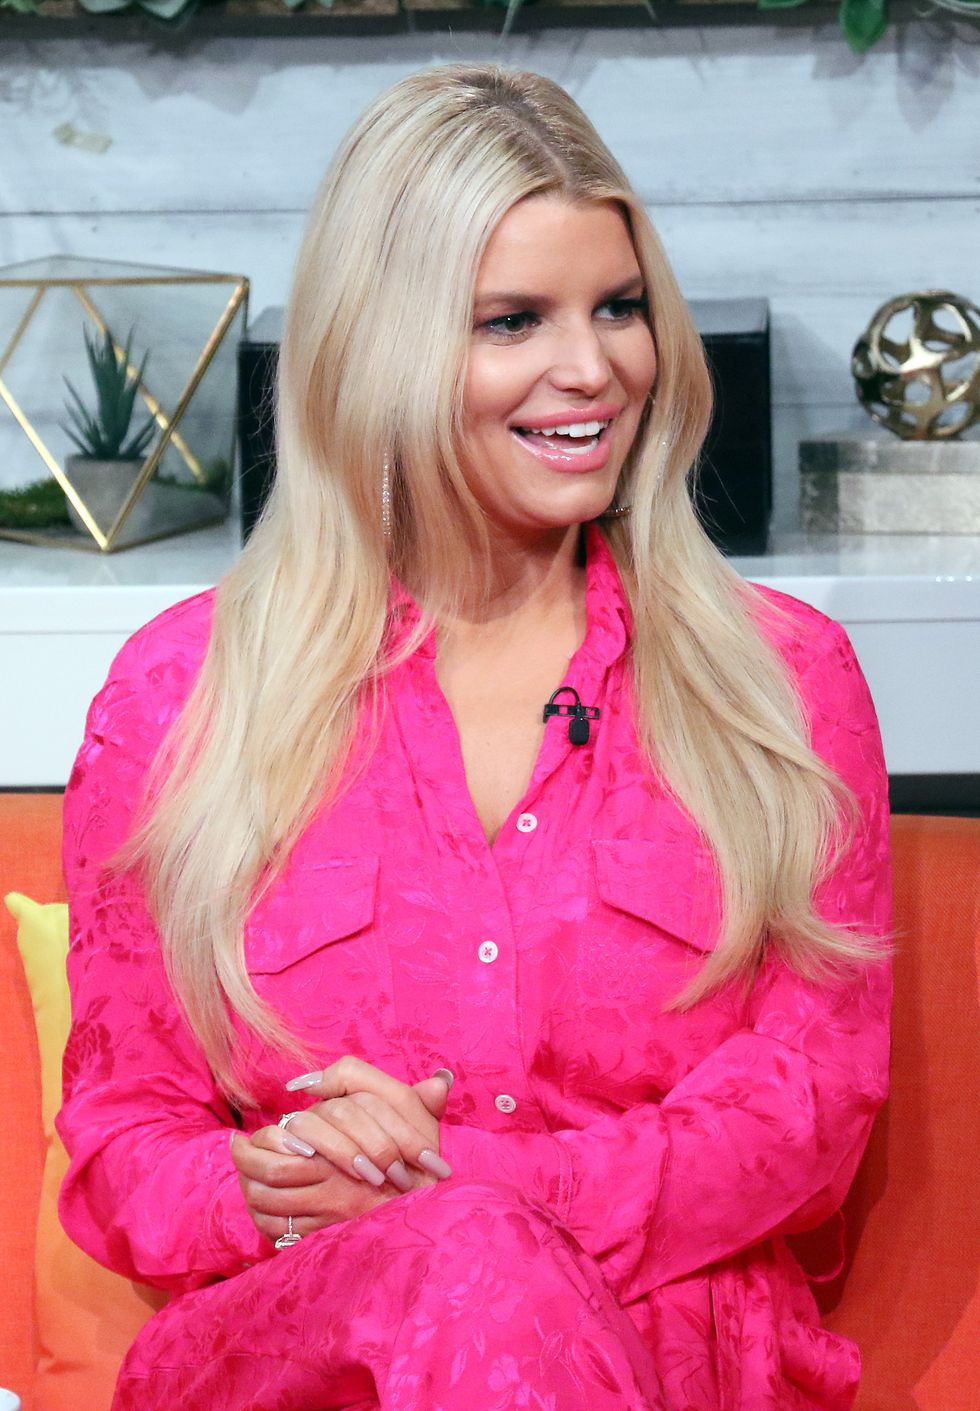 new york, new york february 04 exclusive coverage singer jessica simpson visits buzzfeeds am to dm on february 04, 2020 in new york city photo by jim spellmangetty images